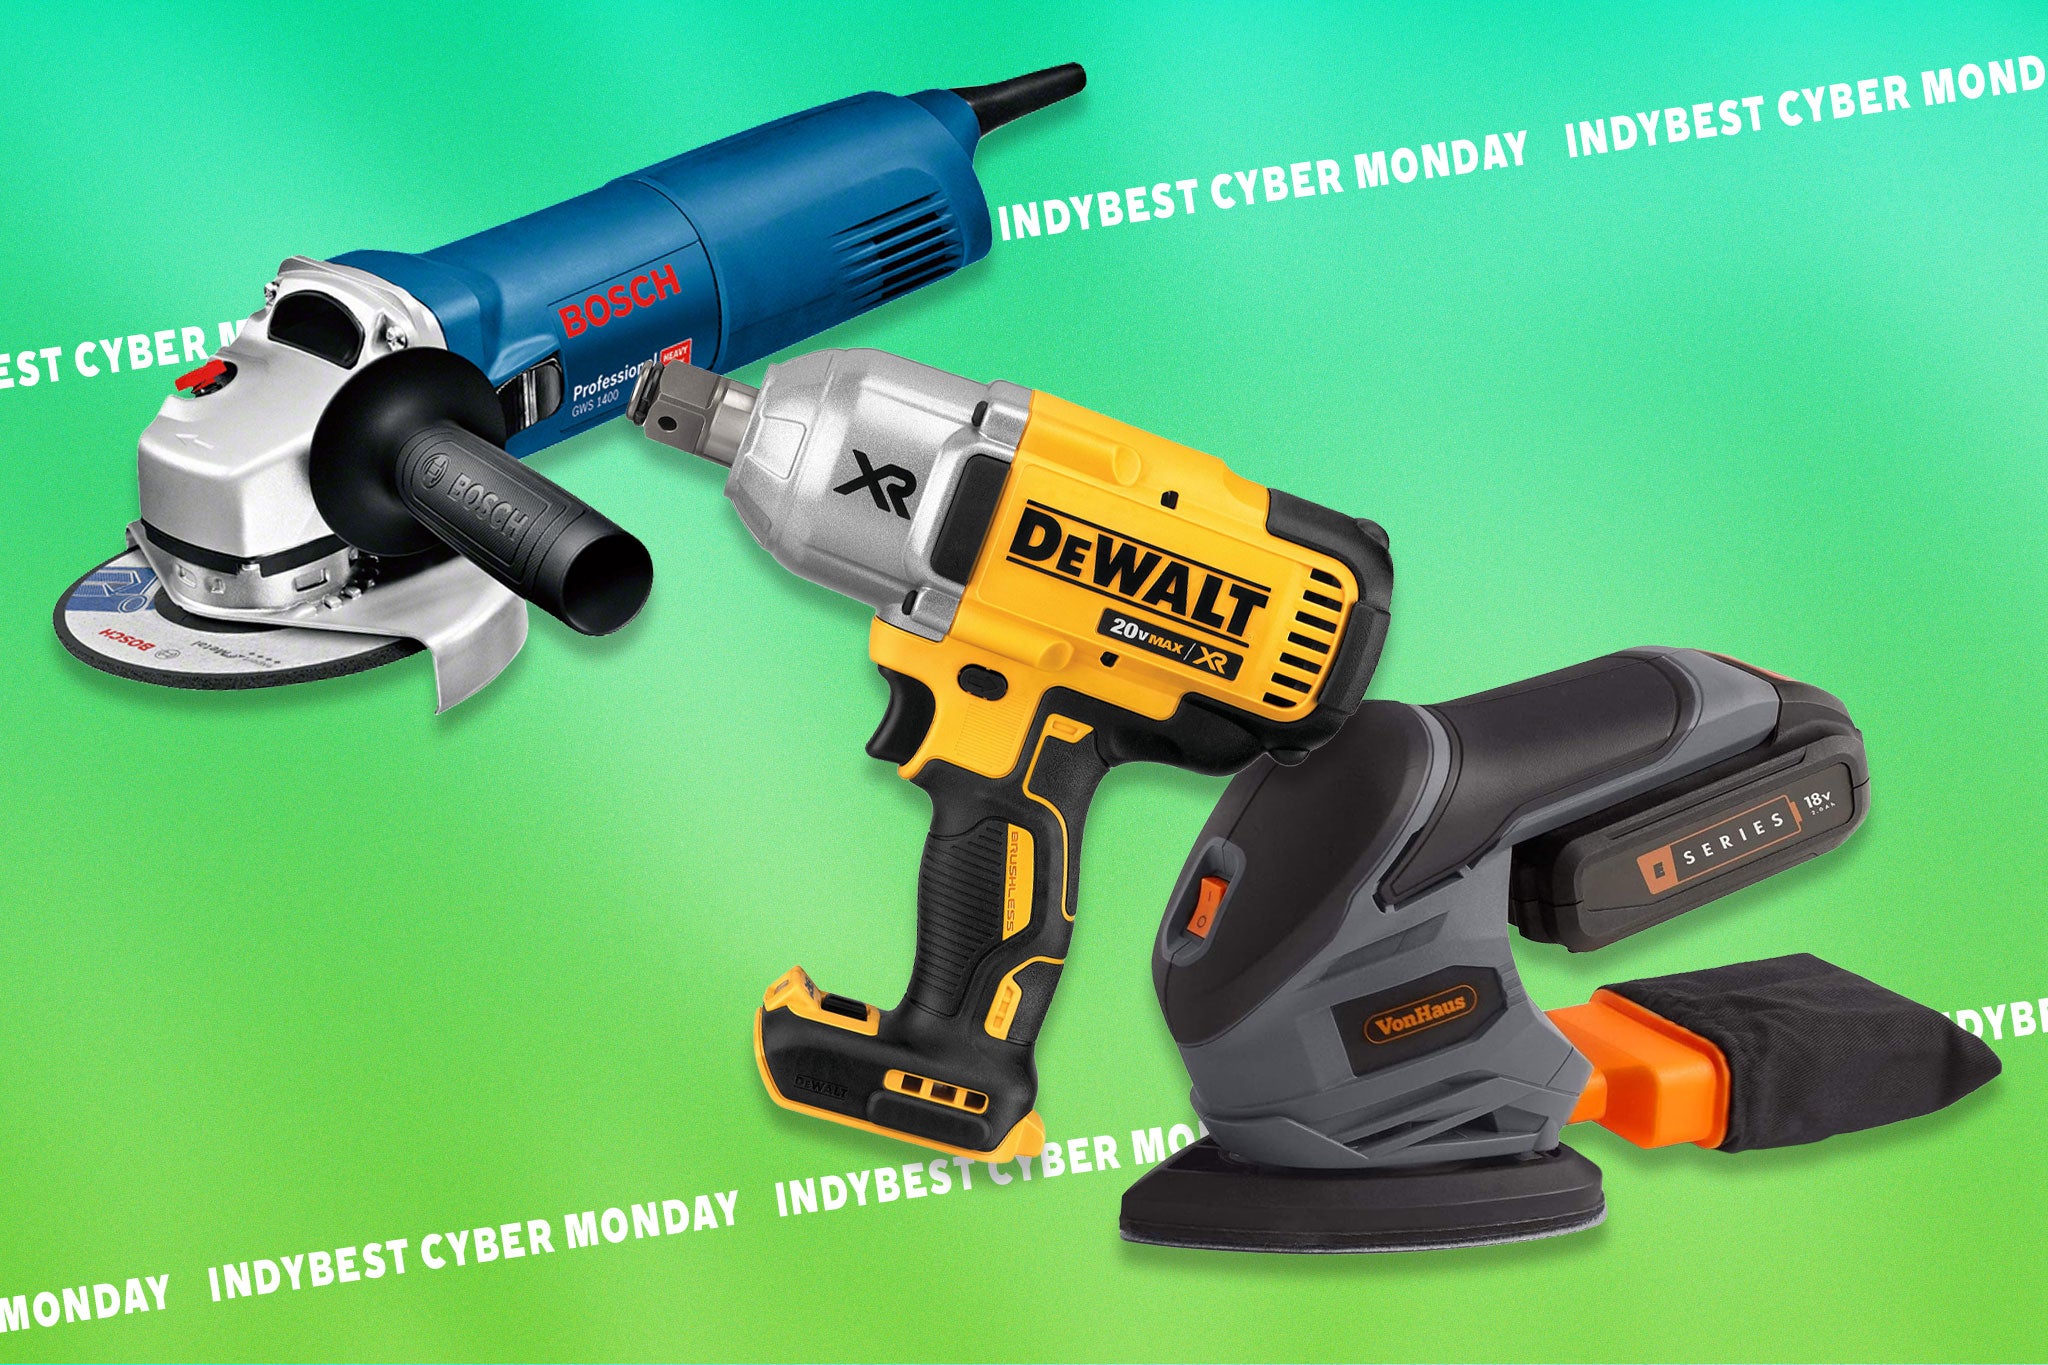 Whether you’re after a drill or a sander, it’s here where you’ll find the best offers